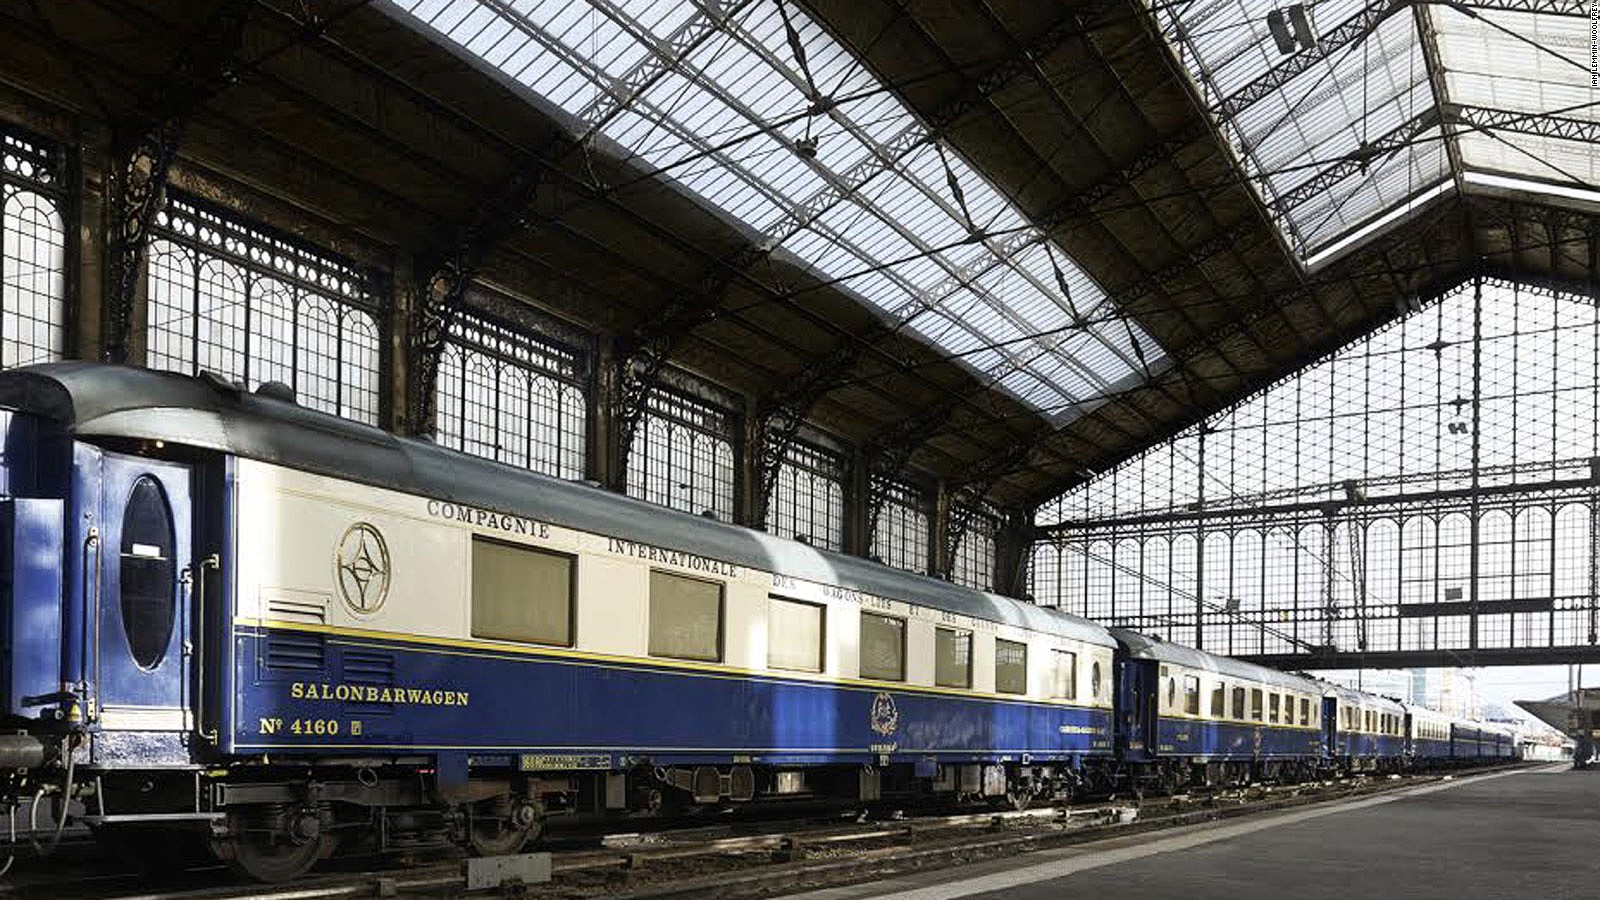 Underground Railway in List of France stations located Disused Stations